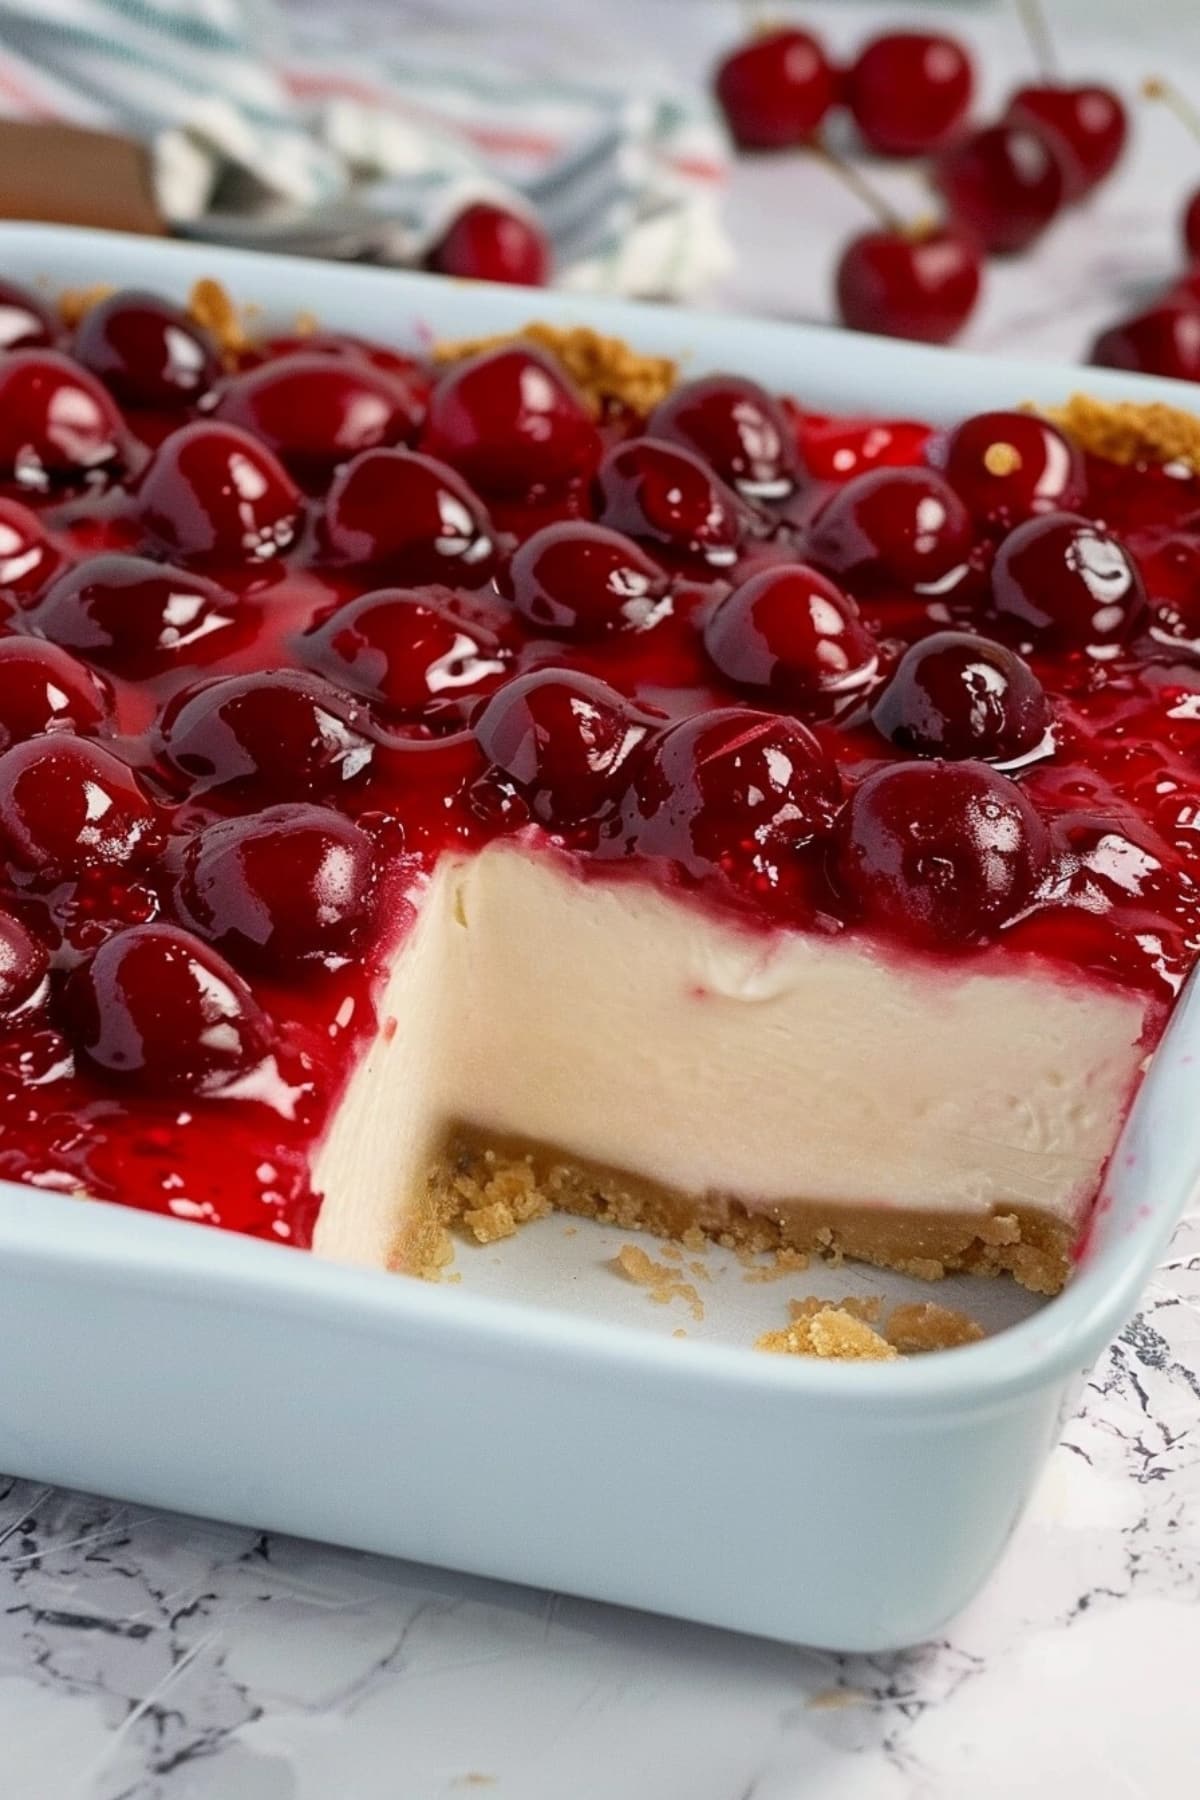 Cherry delight dessert in a baking dish with a slice missing